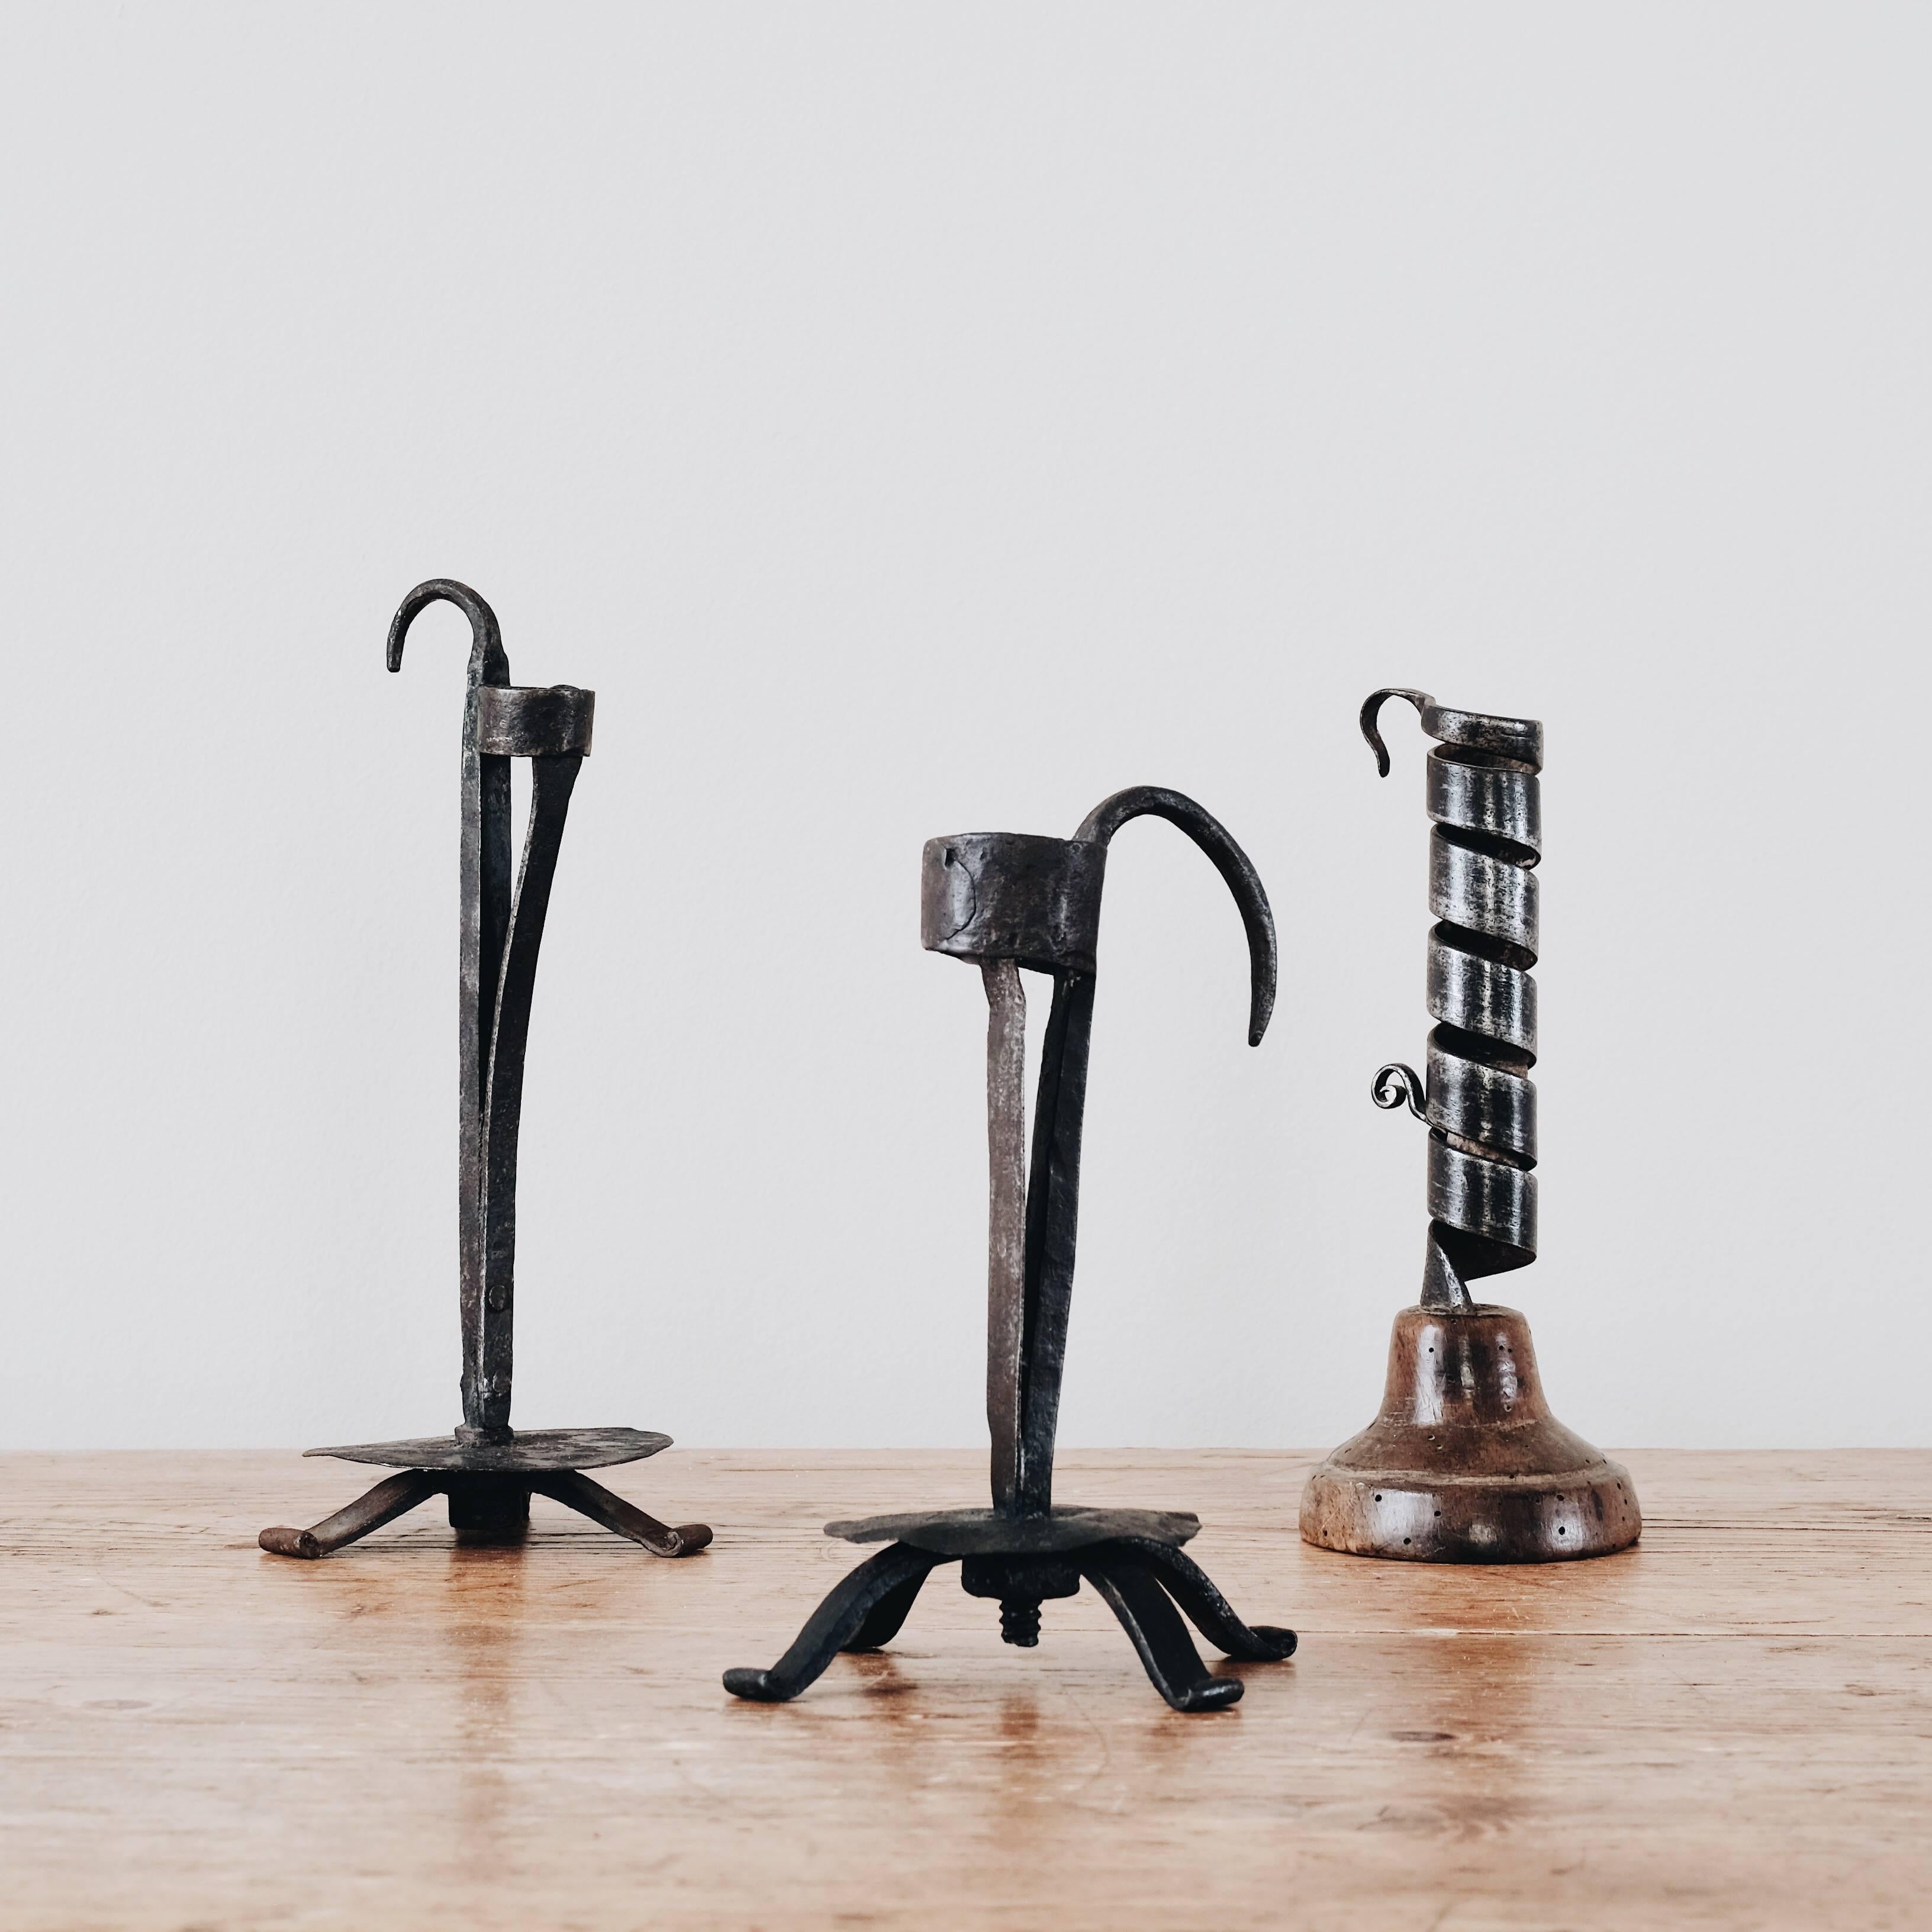 Great collection of two early 19th century Swedish wrought iron rush candleholders and one 18th century Swedish wrought iron spiral twist candleholder on a wooden base with an adjustable metal socket that holds the candle.